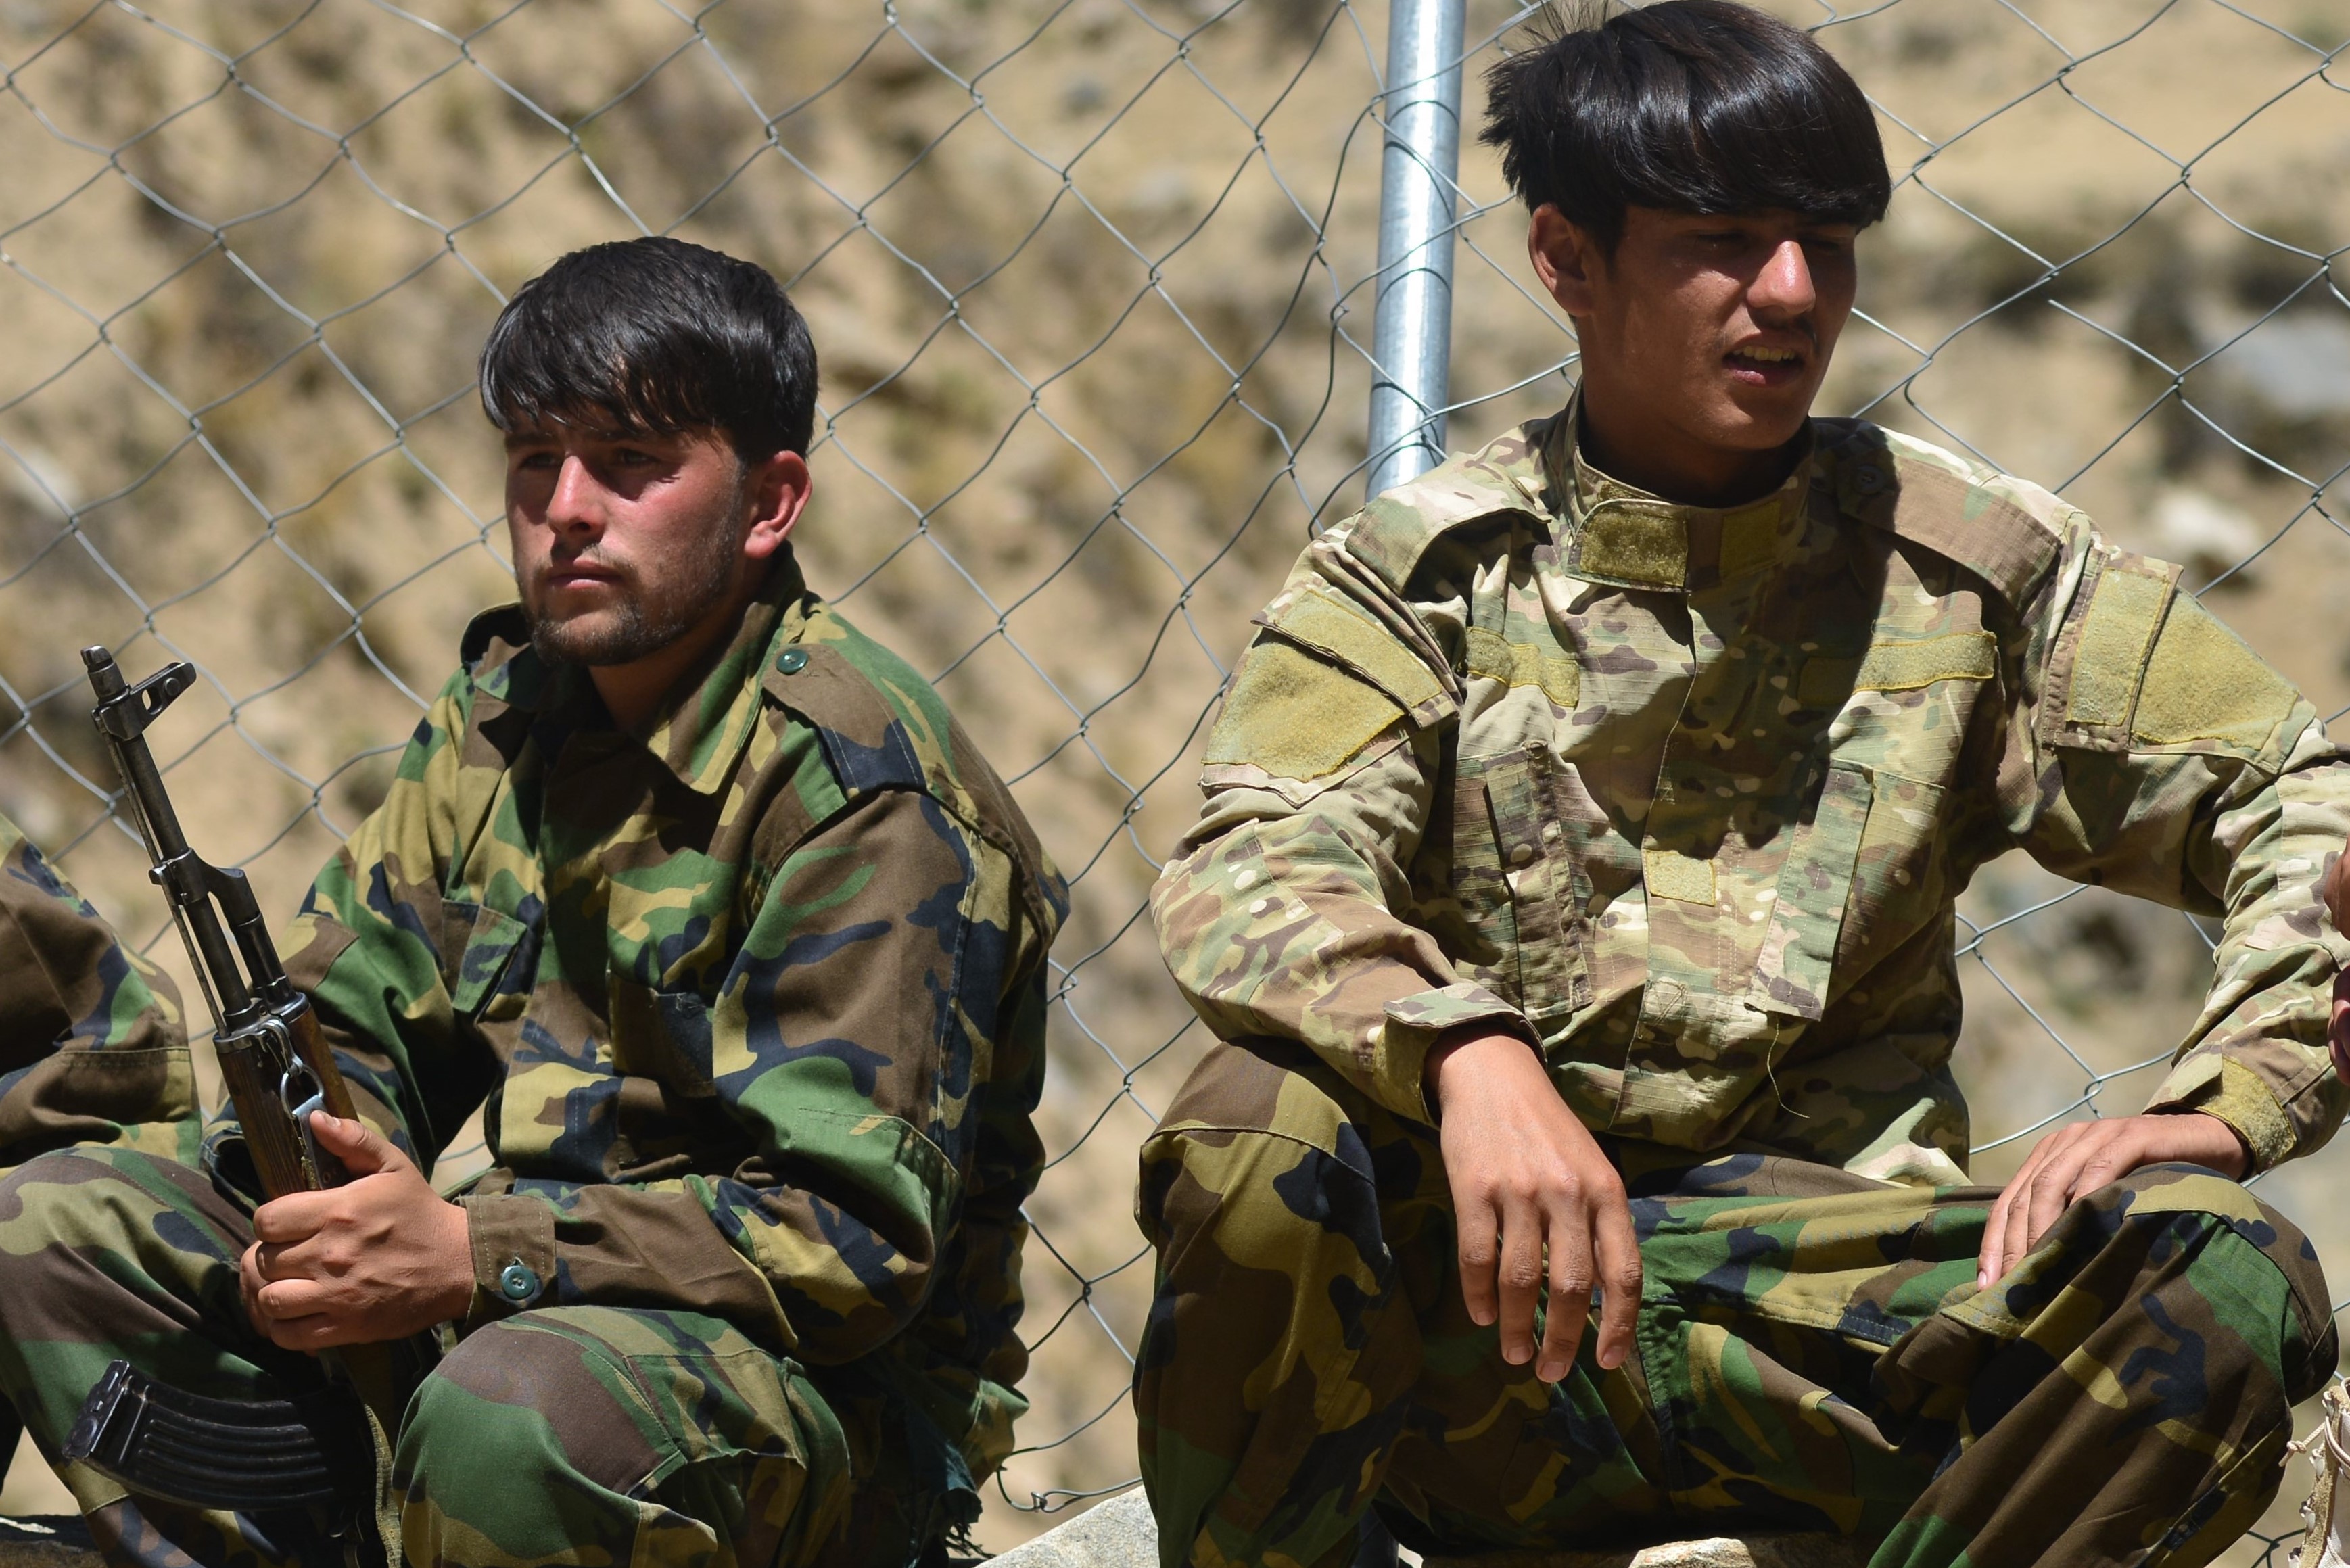 Afghan resistance movement and anti-Taliban uprising forces rest during military training at the Abdullah Khil area of Dara district in Panjshir province on August 24, 2021